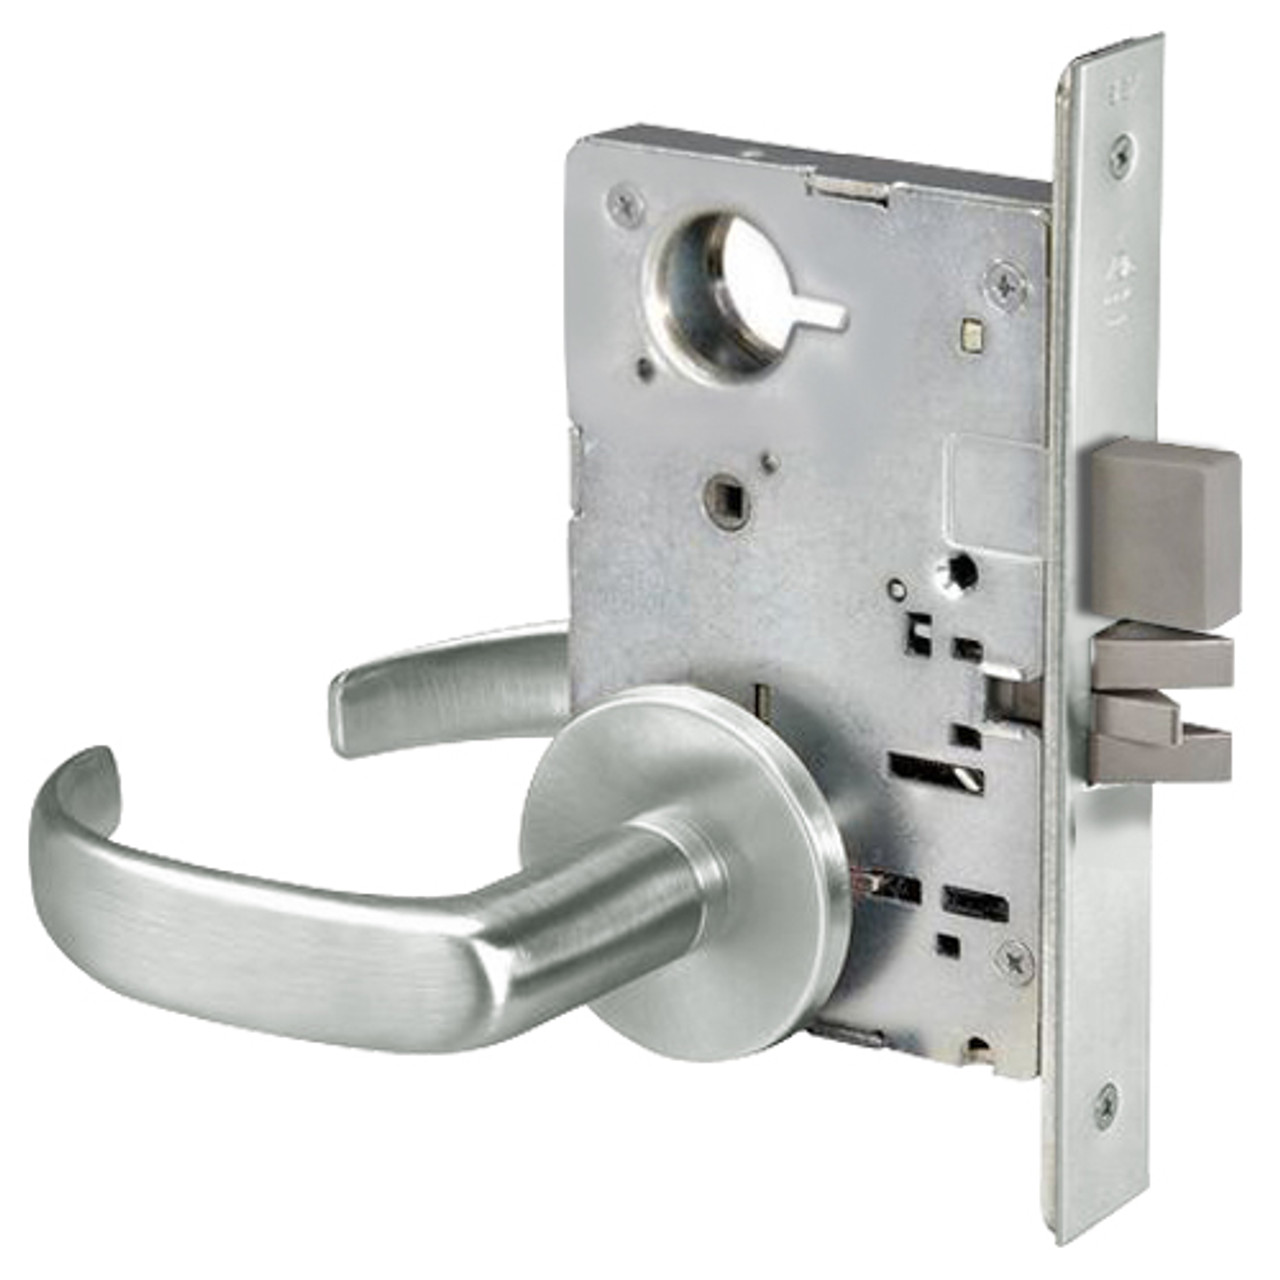 PBR8802FL-618 Yale 8800FL Series Non-Keyed Mortise Privacy Locks with Pacific Beach Lever in Bright Nickel